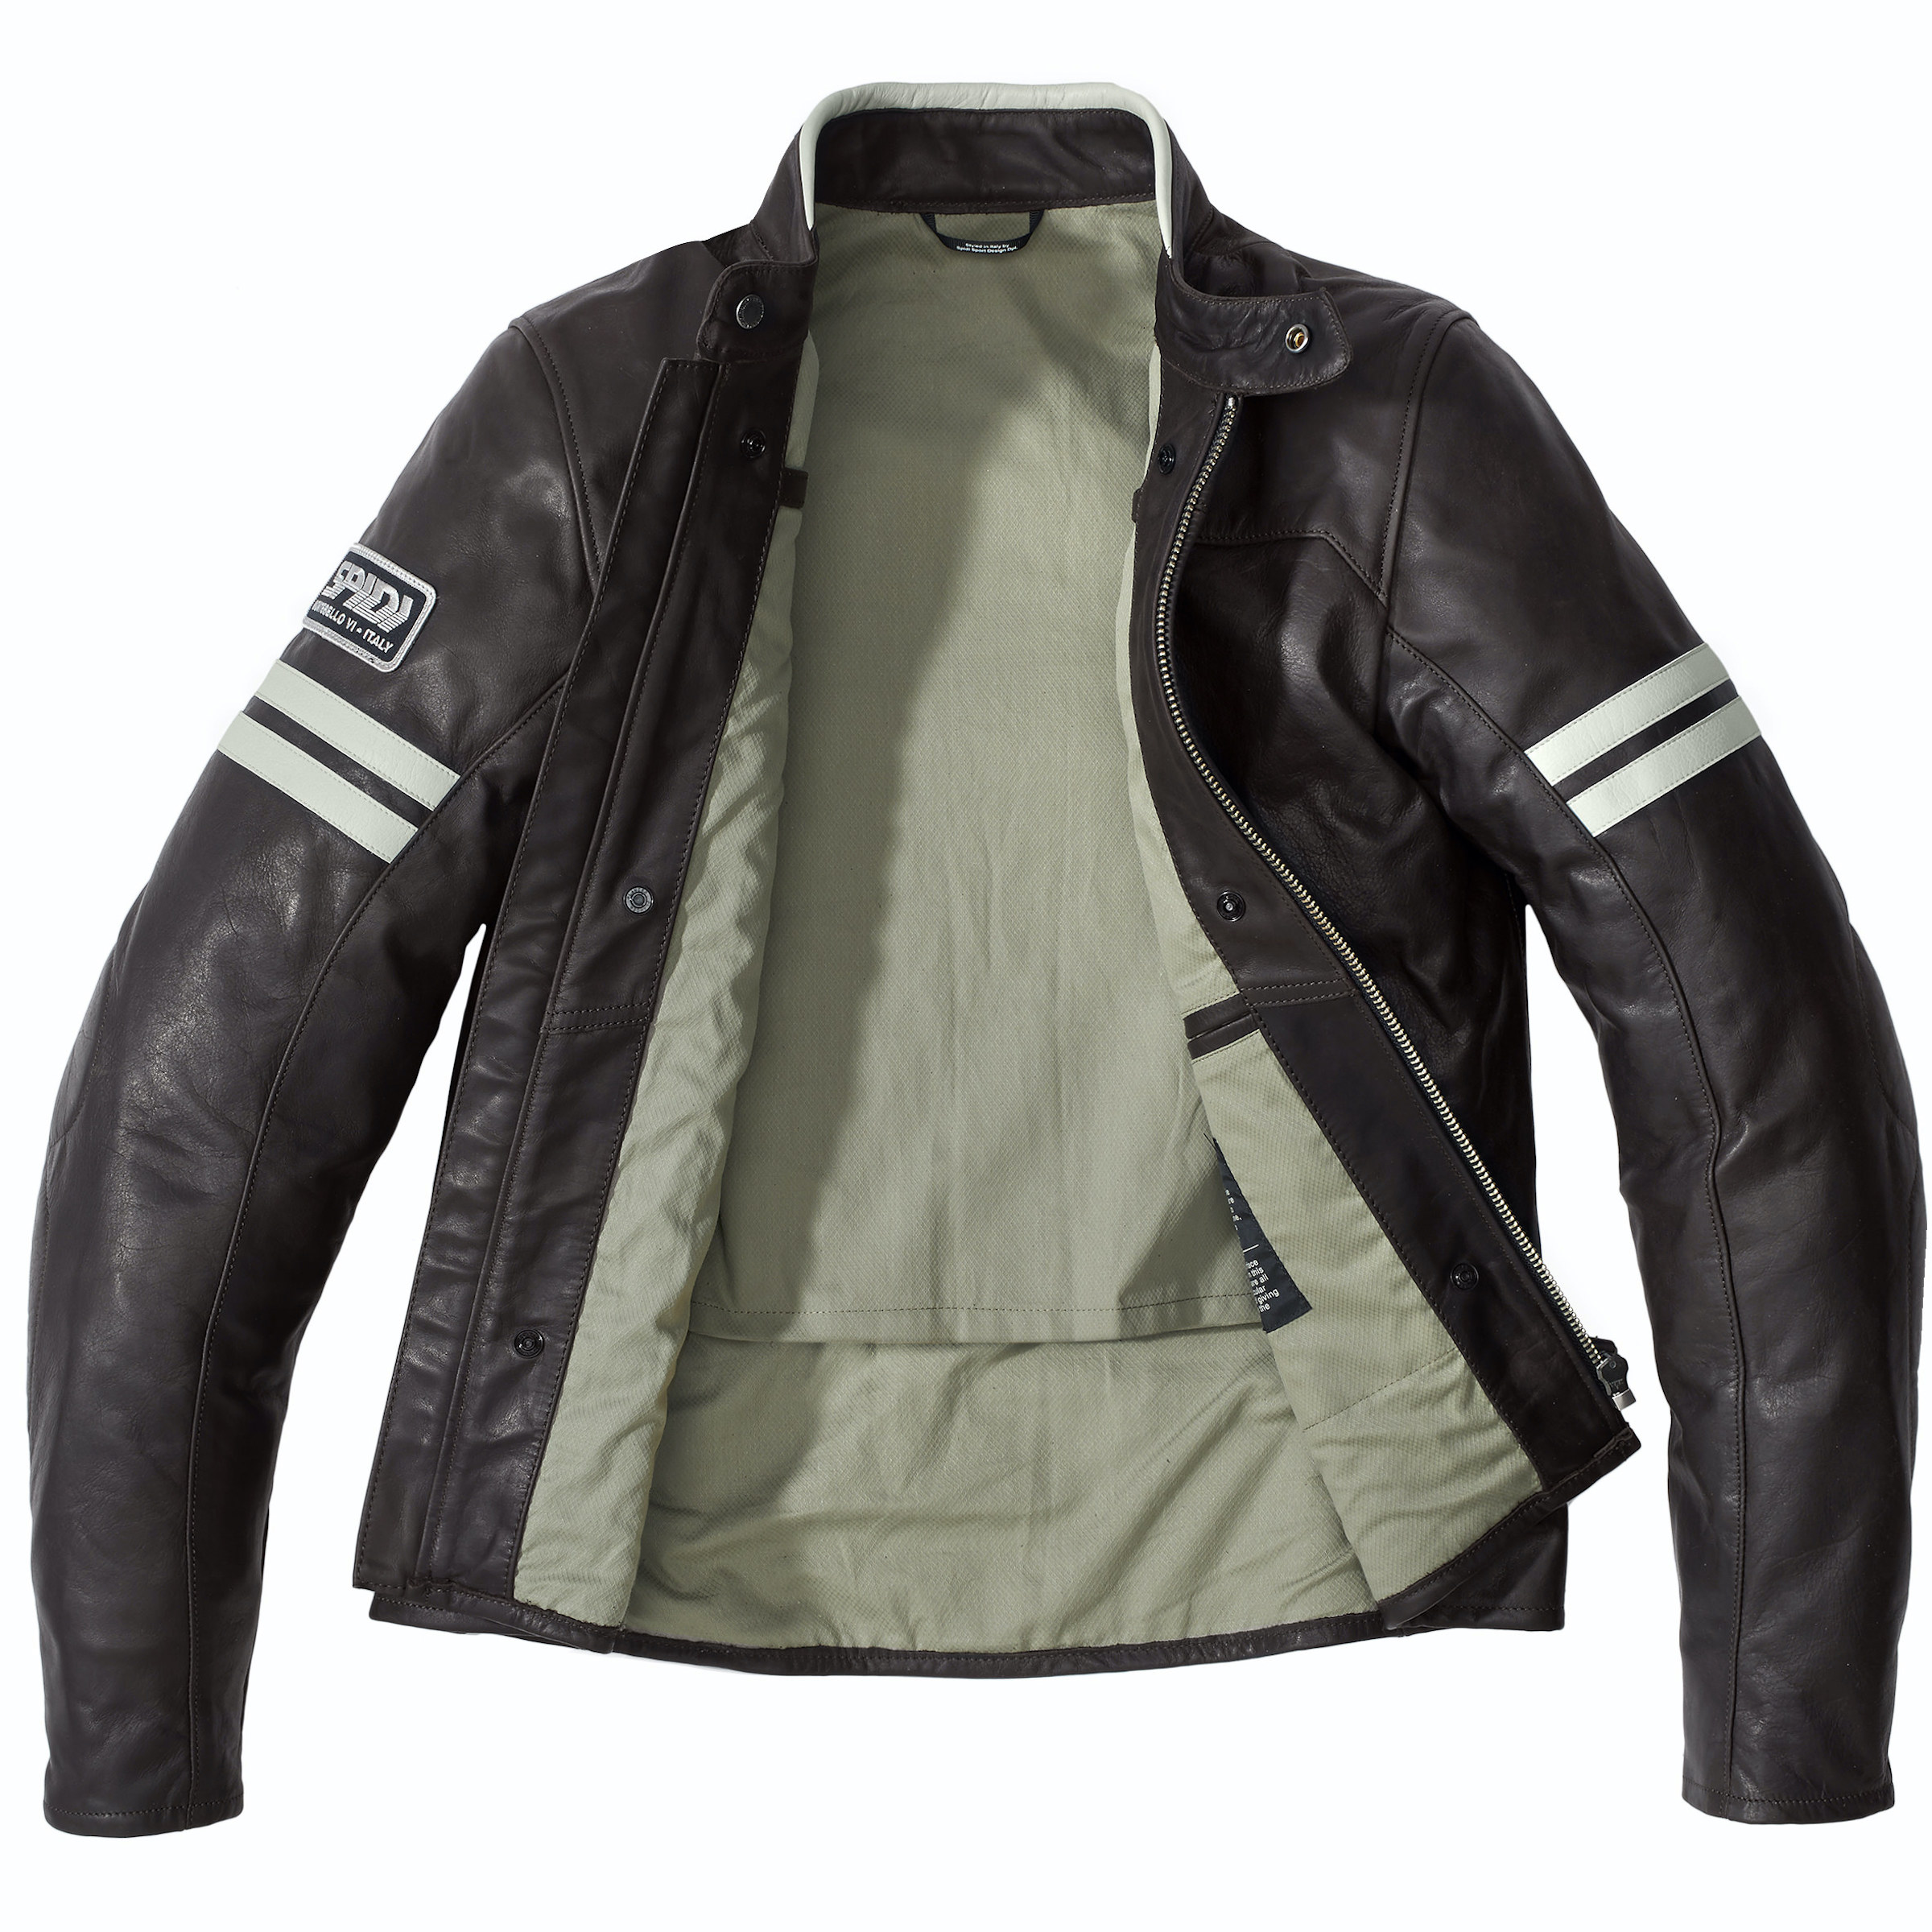 The Spidi Vintage Leather Jacket - A Timeless Italian Motorcycle